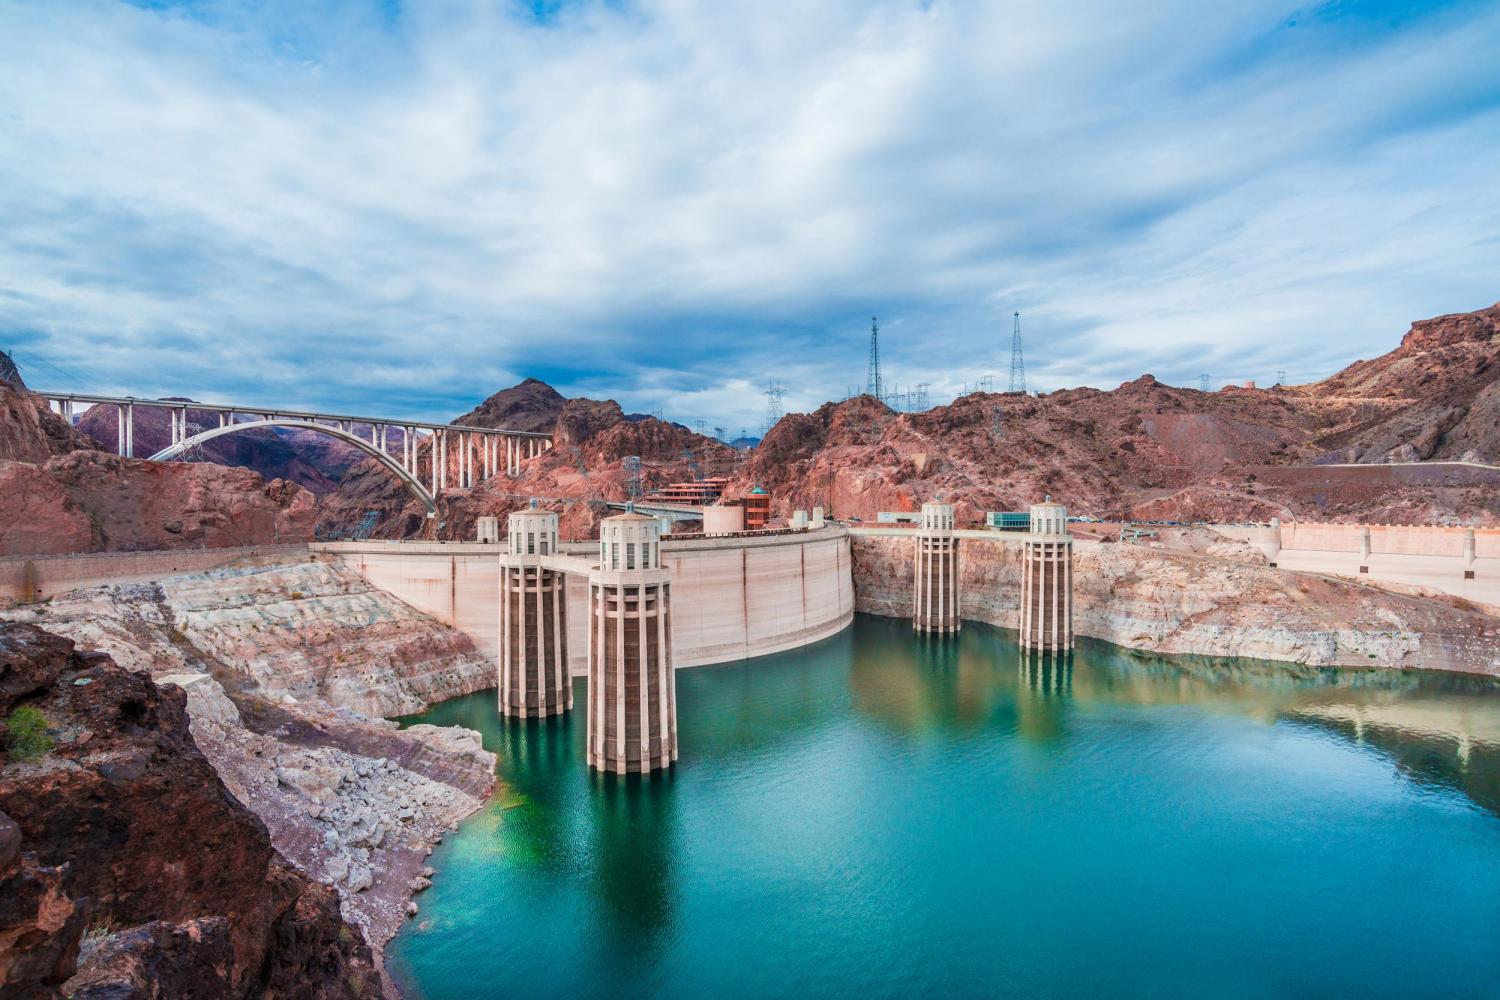 Amazing View Of Hoover Dam From Arizona Side Showing Penstock Towers